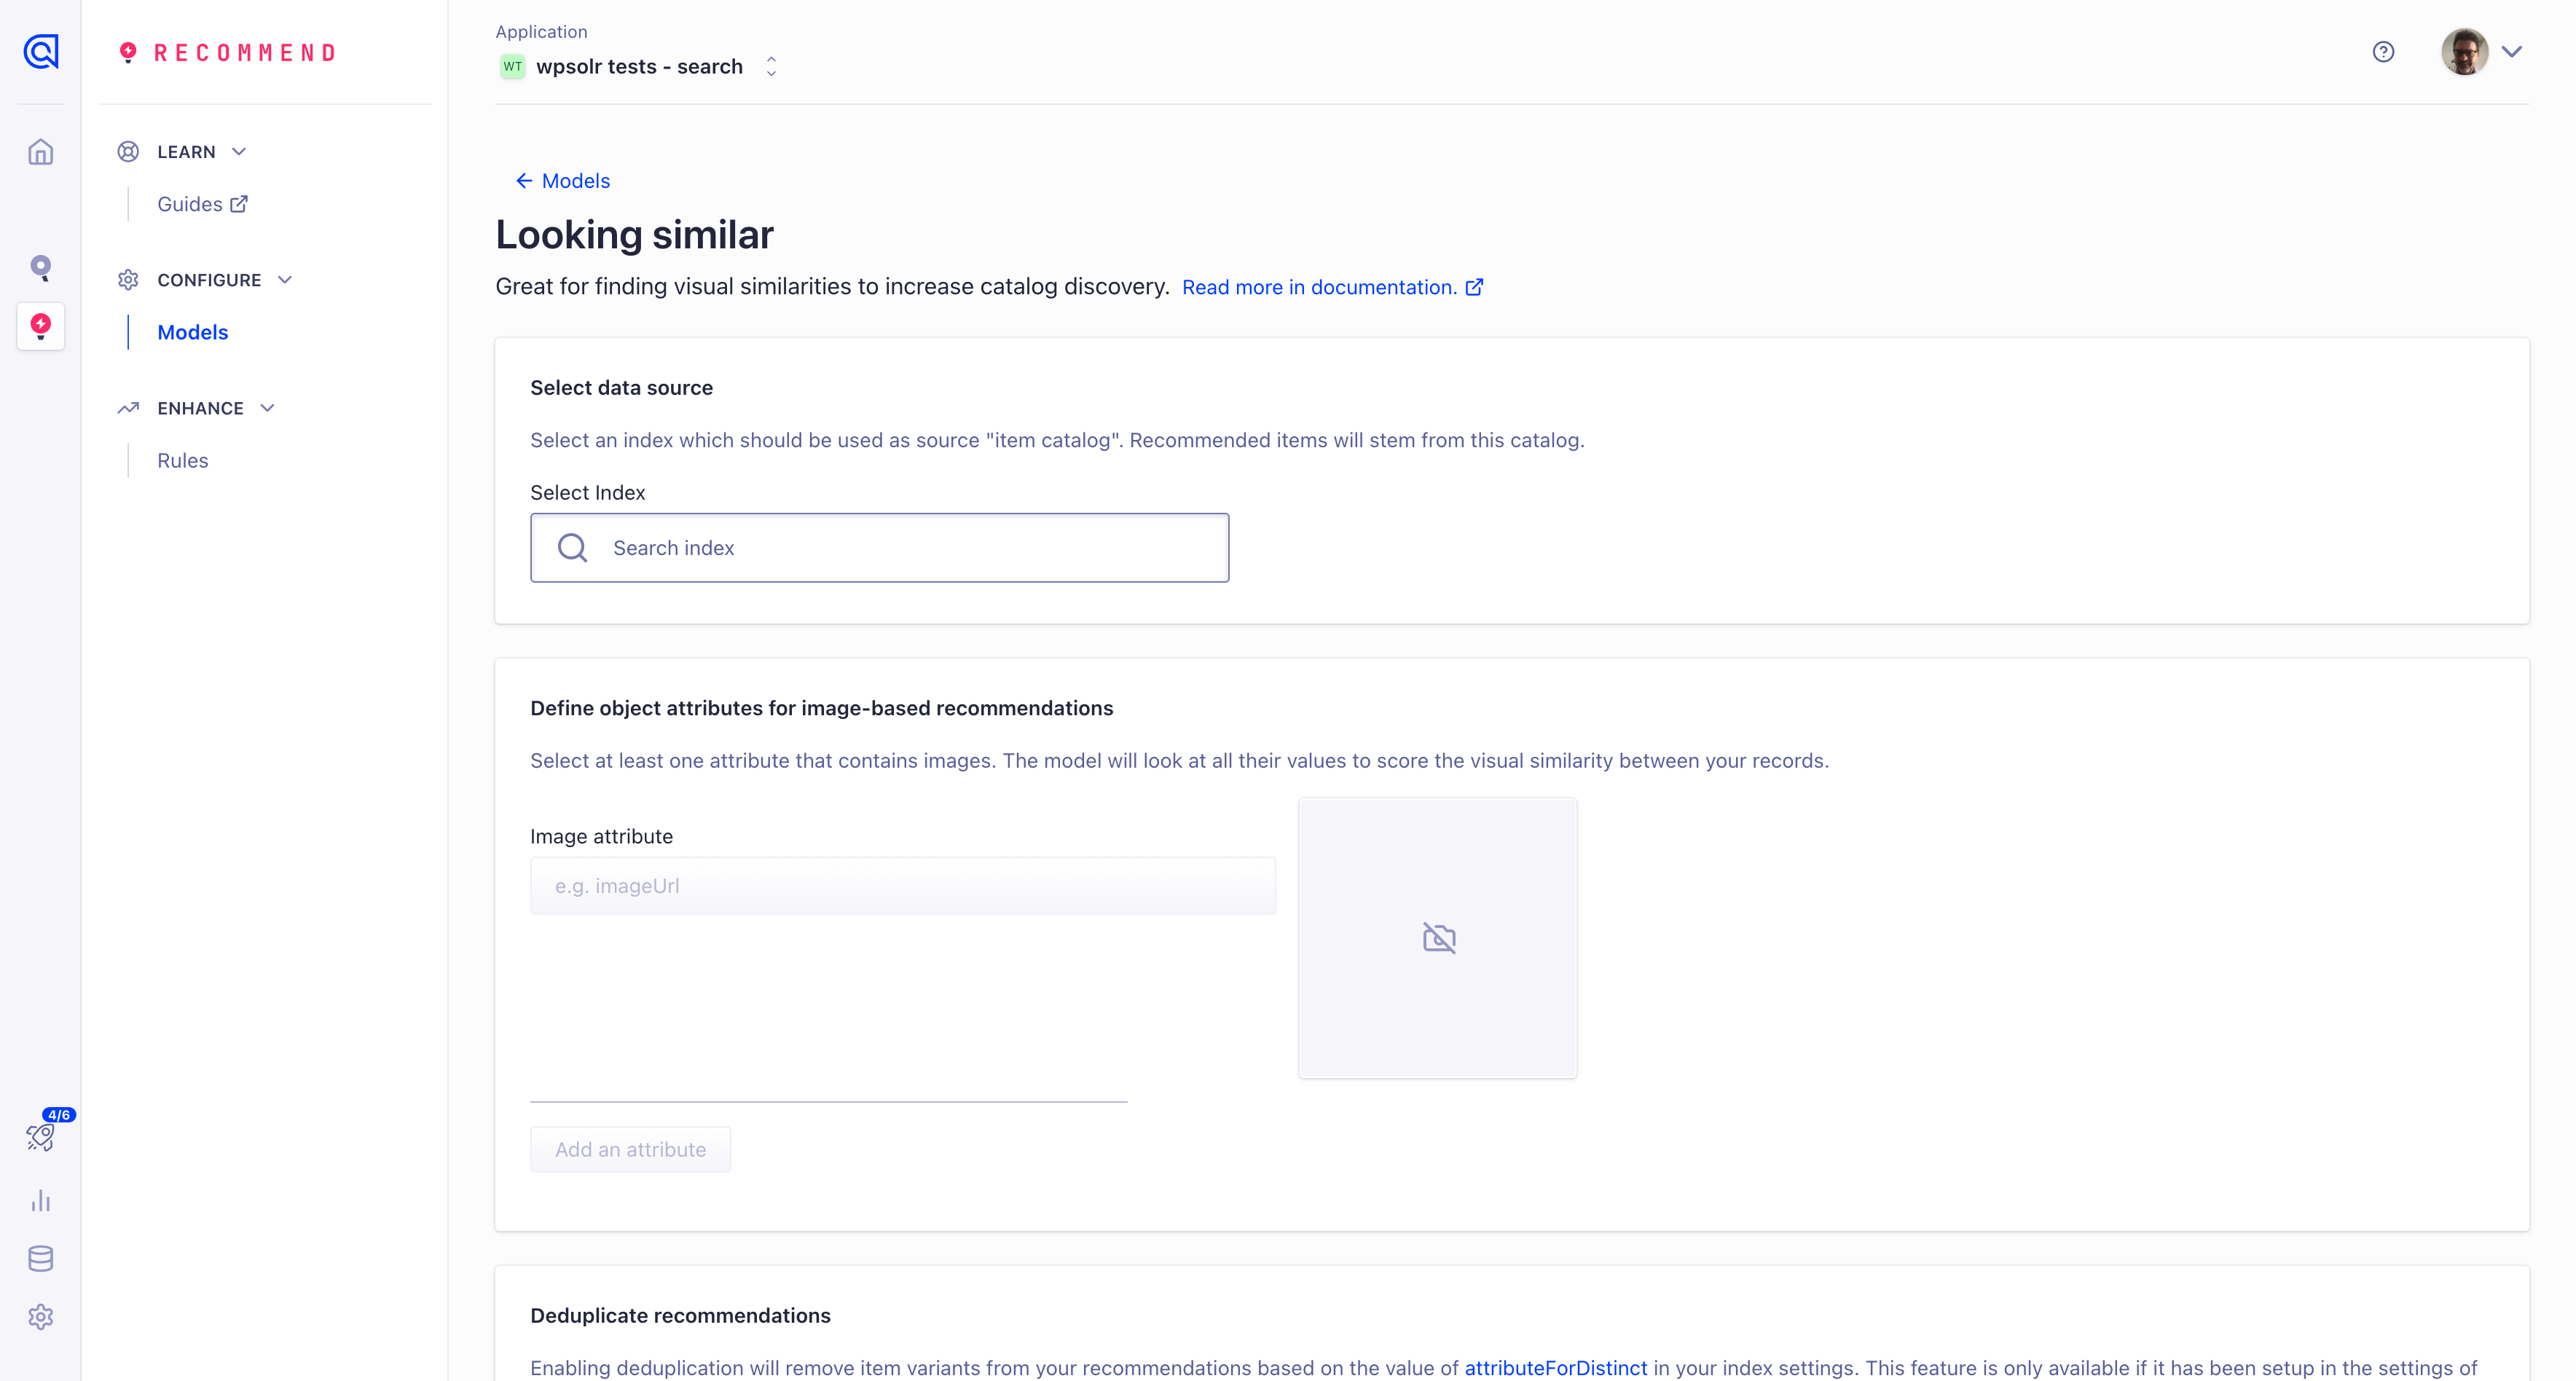 Image algolia-model-looking-similar.png of Algolia recommendations guide